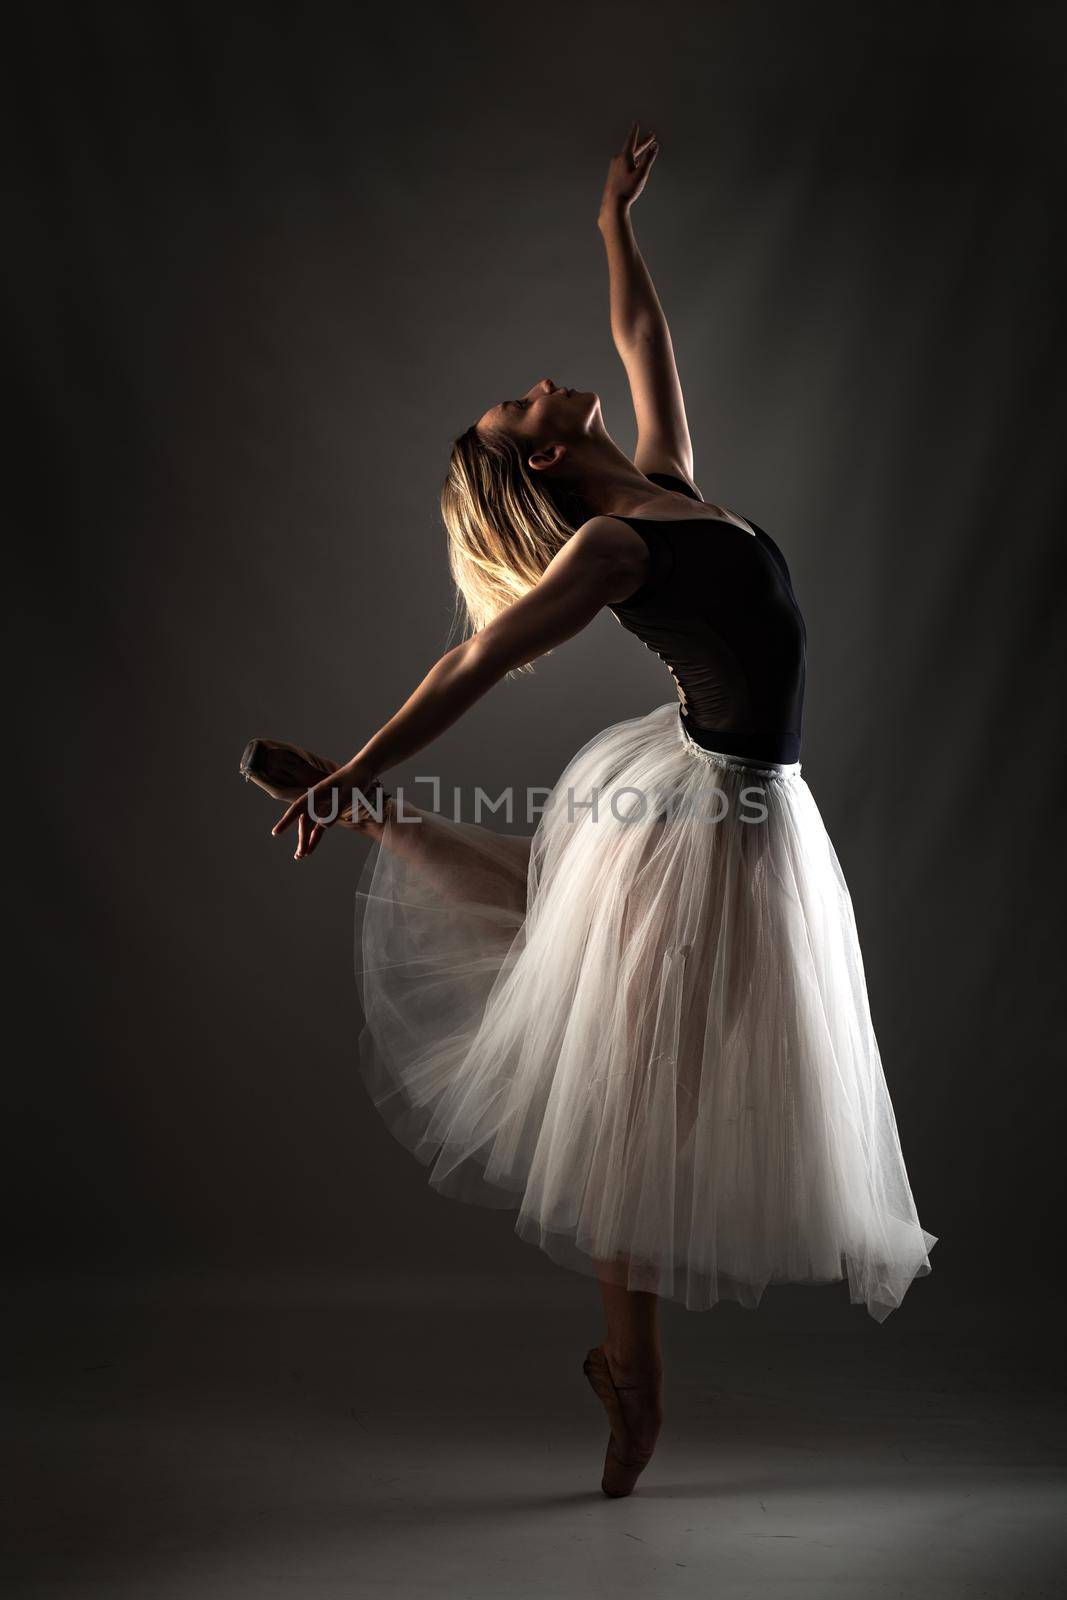 ballerina with a white dress and black top posing on gray background